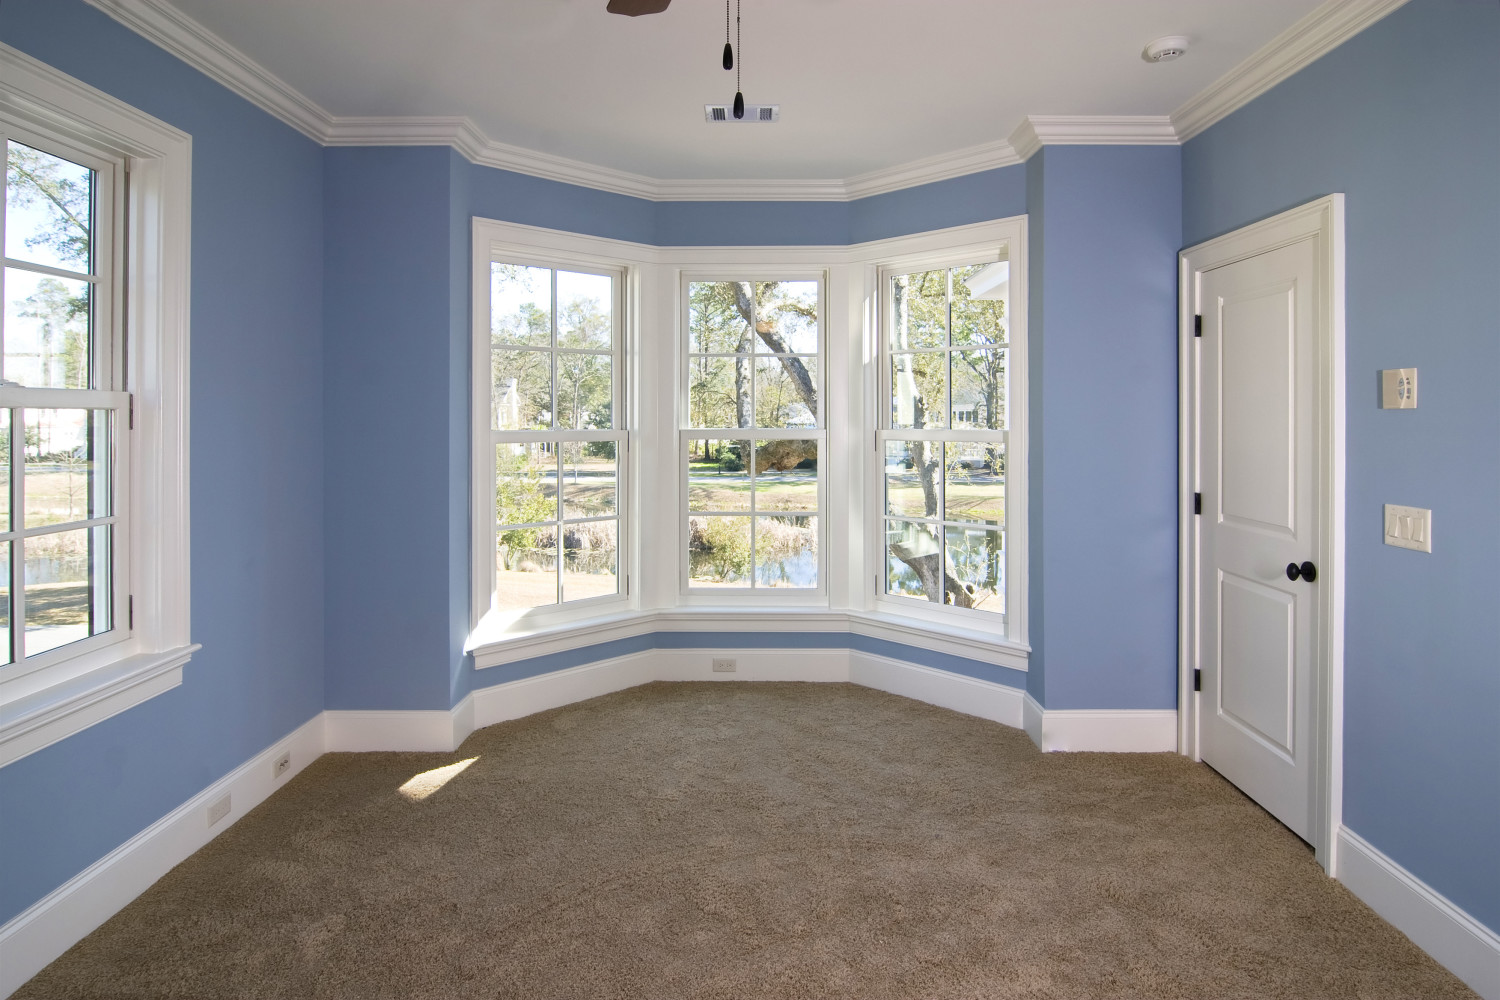 Painting Your Bedroom Blue Can Change Your Mood   Simplemost